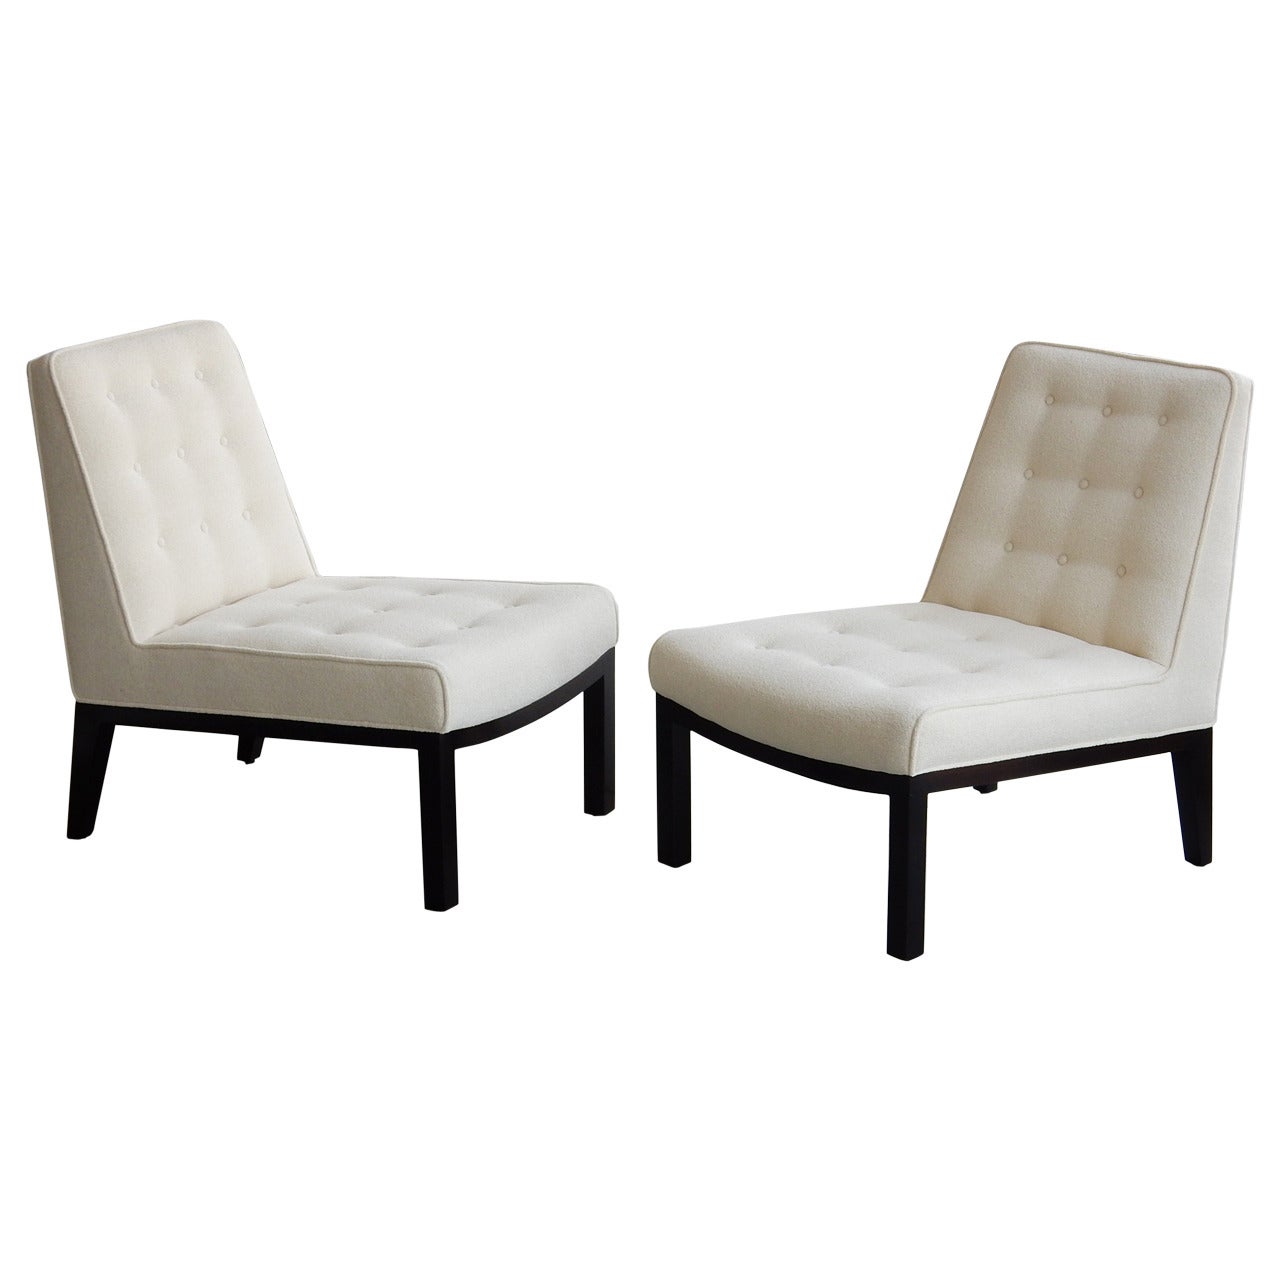 Pair of Dunbar Lounge Chairs by Edward Wormley